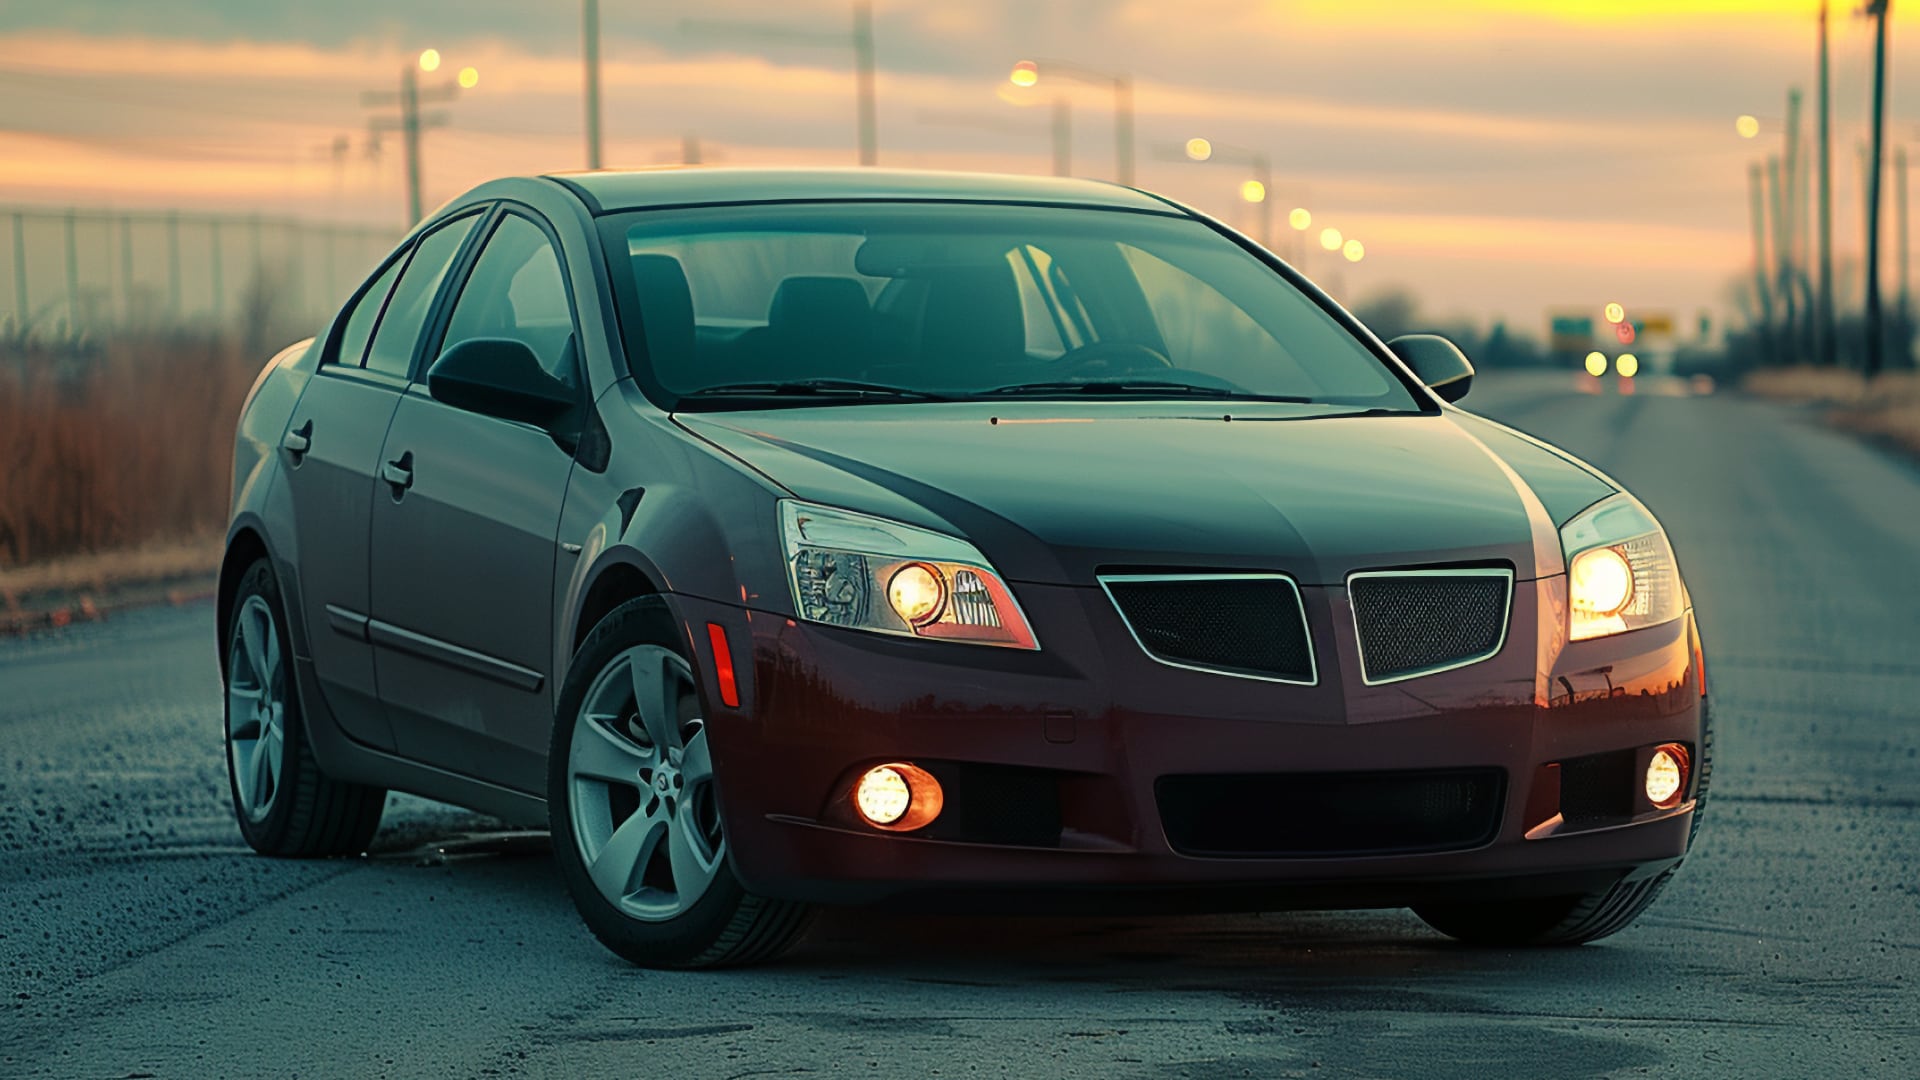 A Pontiac G6 car driving on the road.